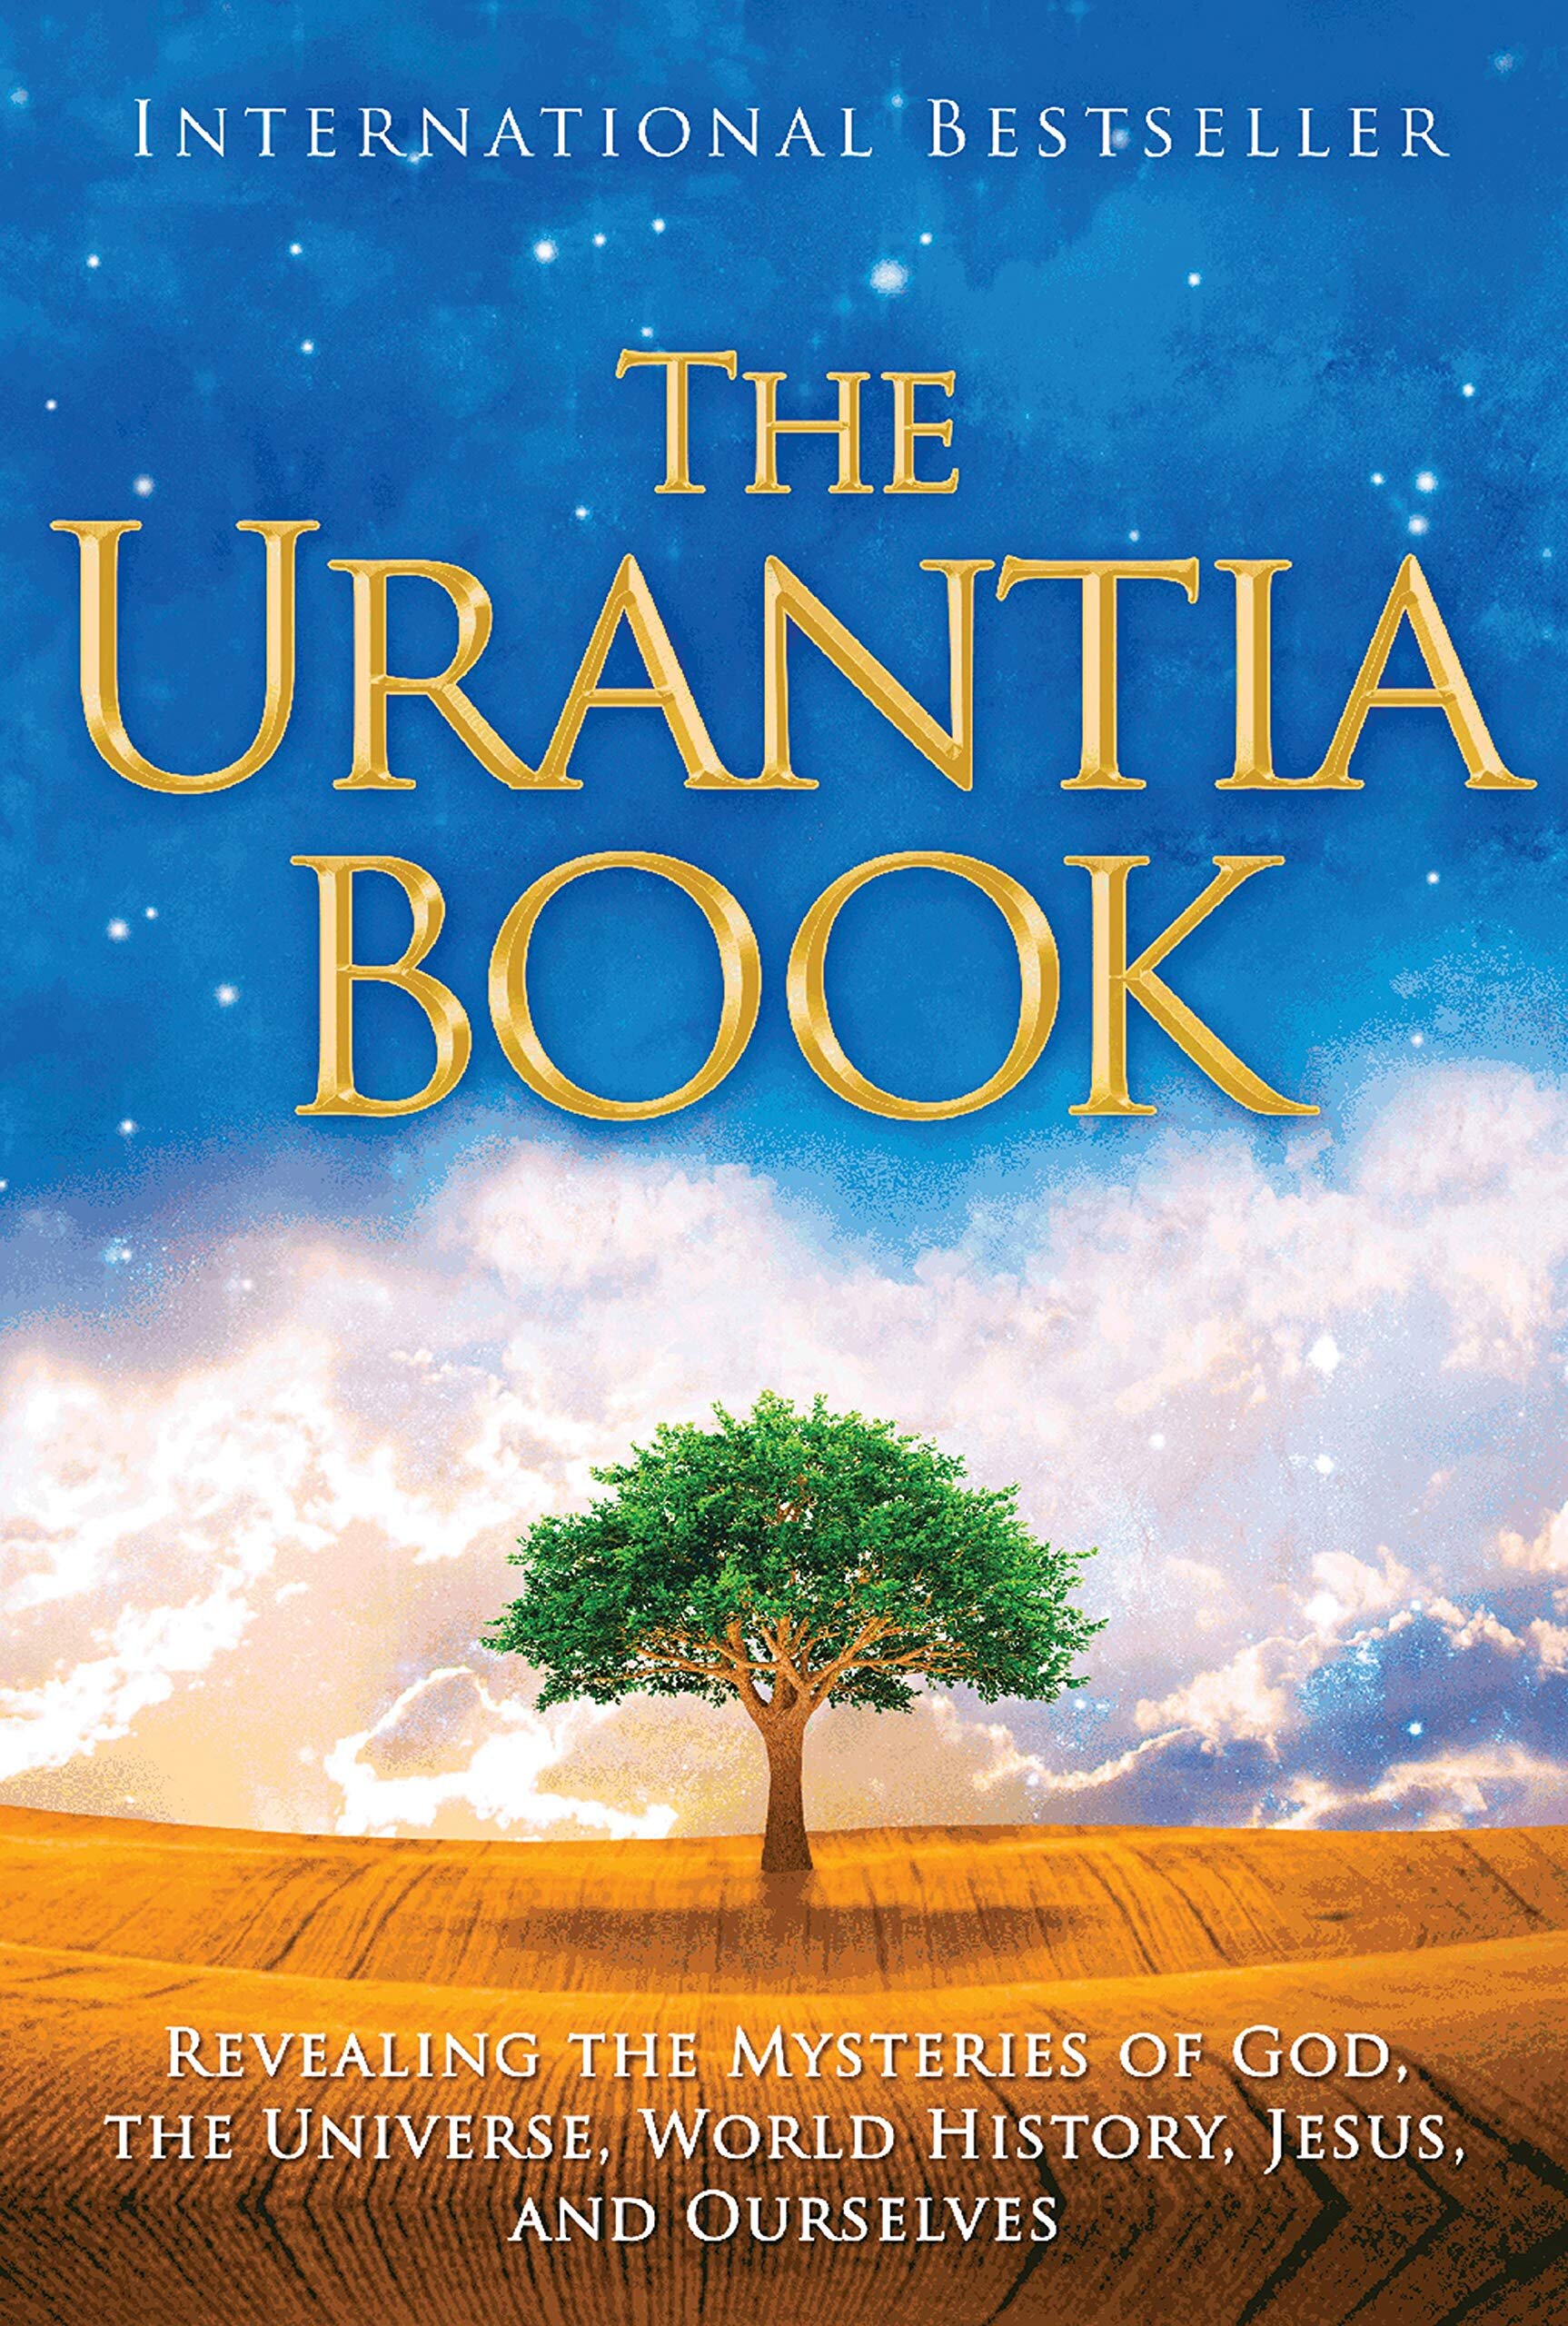 Mysteries　The　Jesus,　—　the　Revealing　God,　Urantia　Universe,　Books　Book:　and　World　of　Bliss　the　History,　Ourselves　Wine